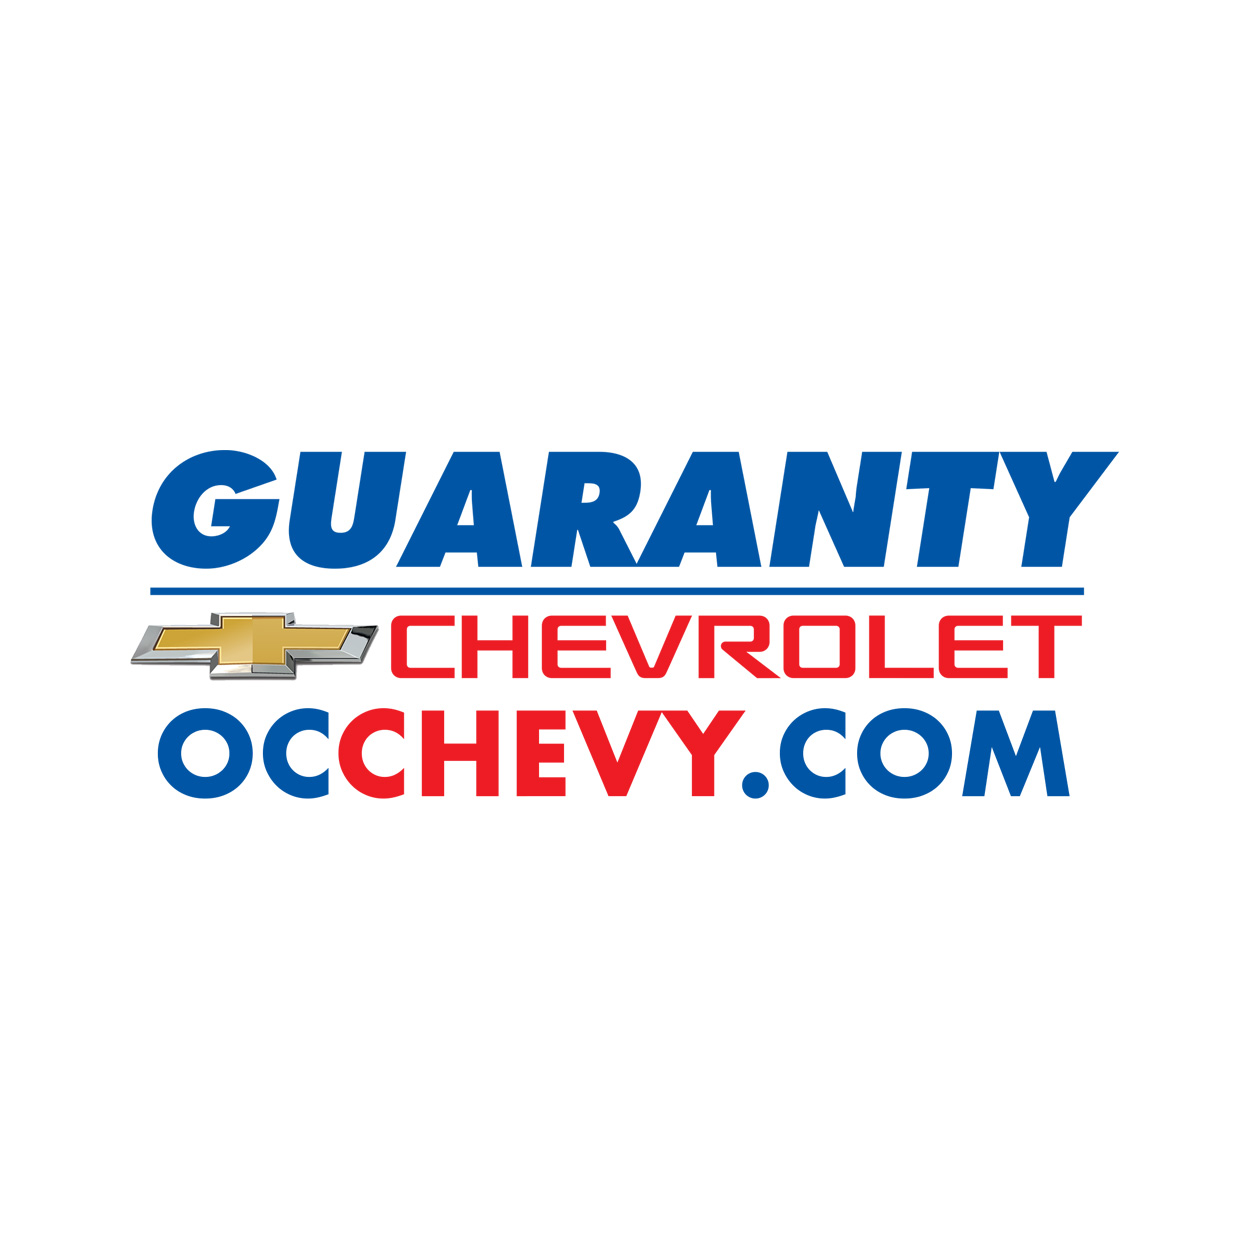 Image result for guarantee chevy